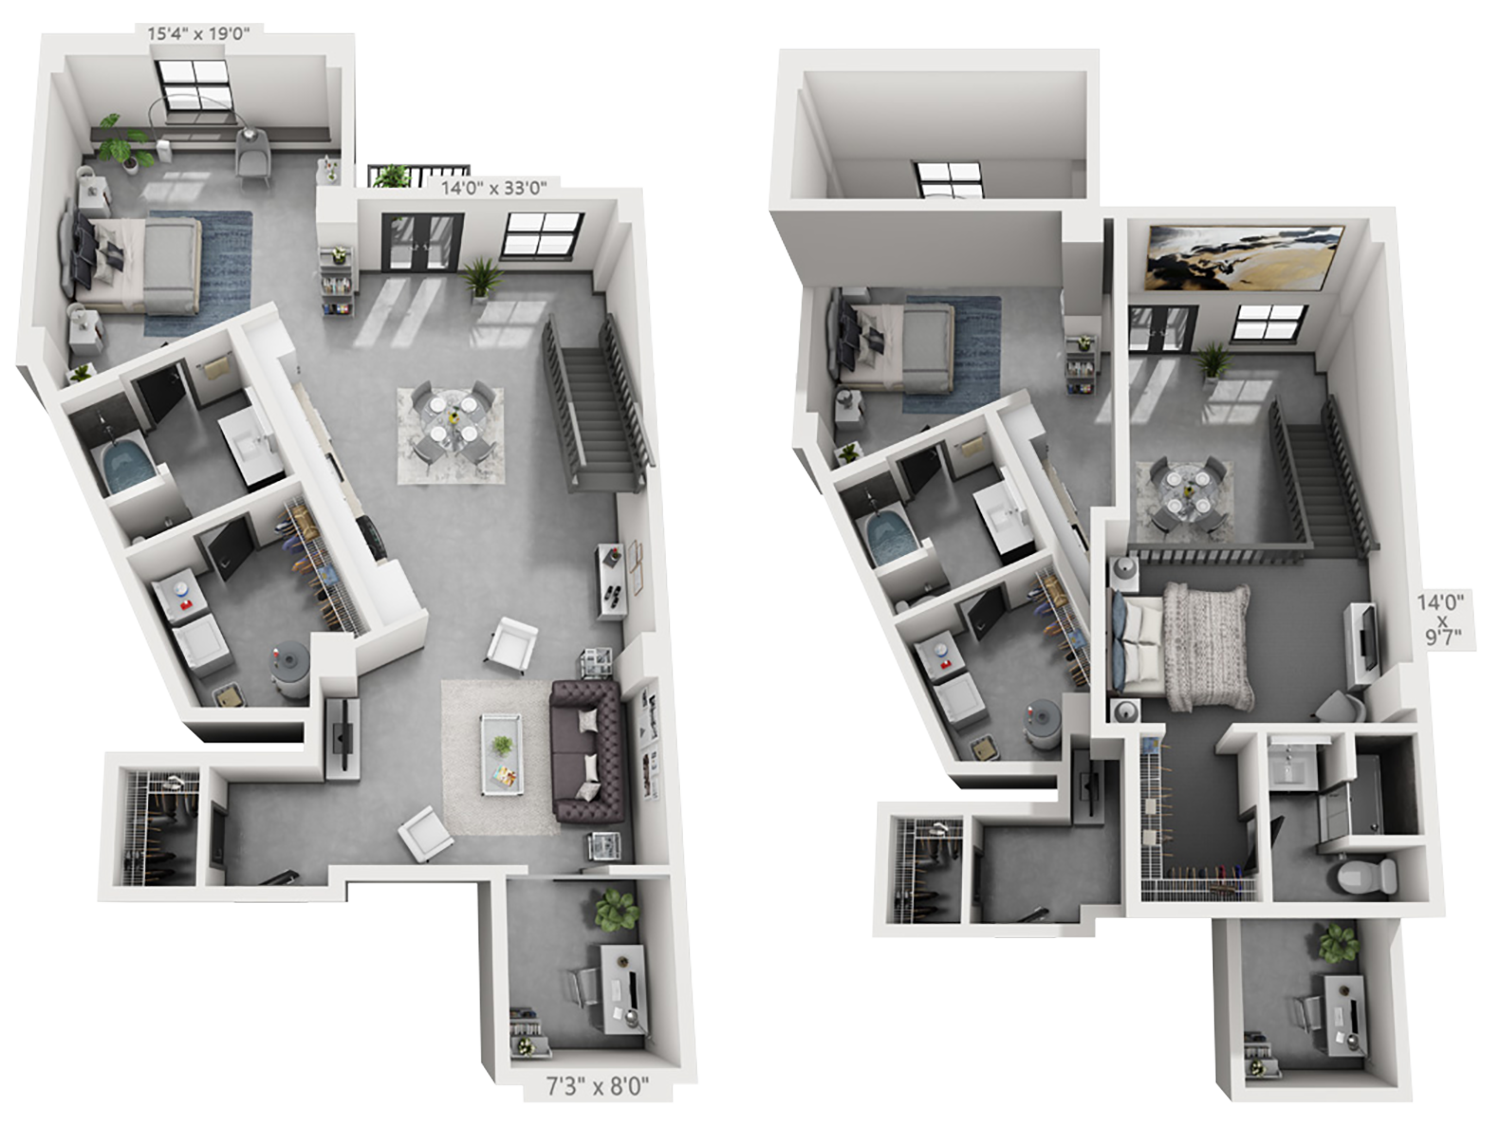 B11M plan is 2 bed, 2 bath and 1,446 square feet